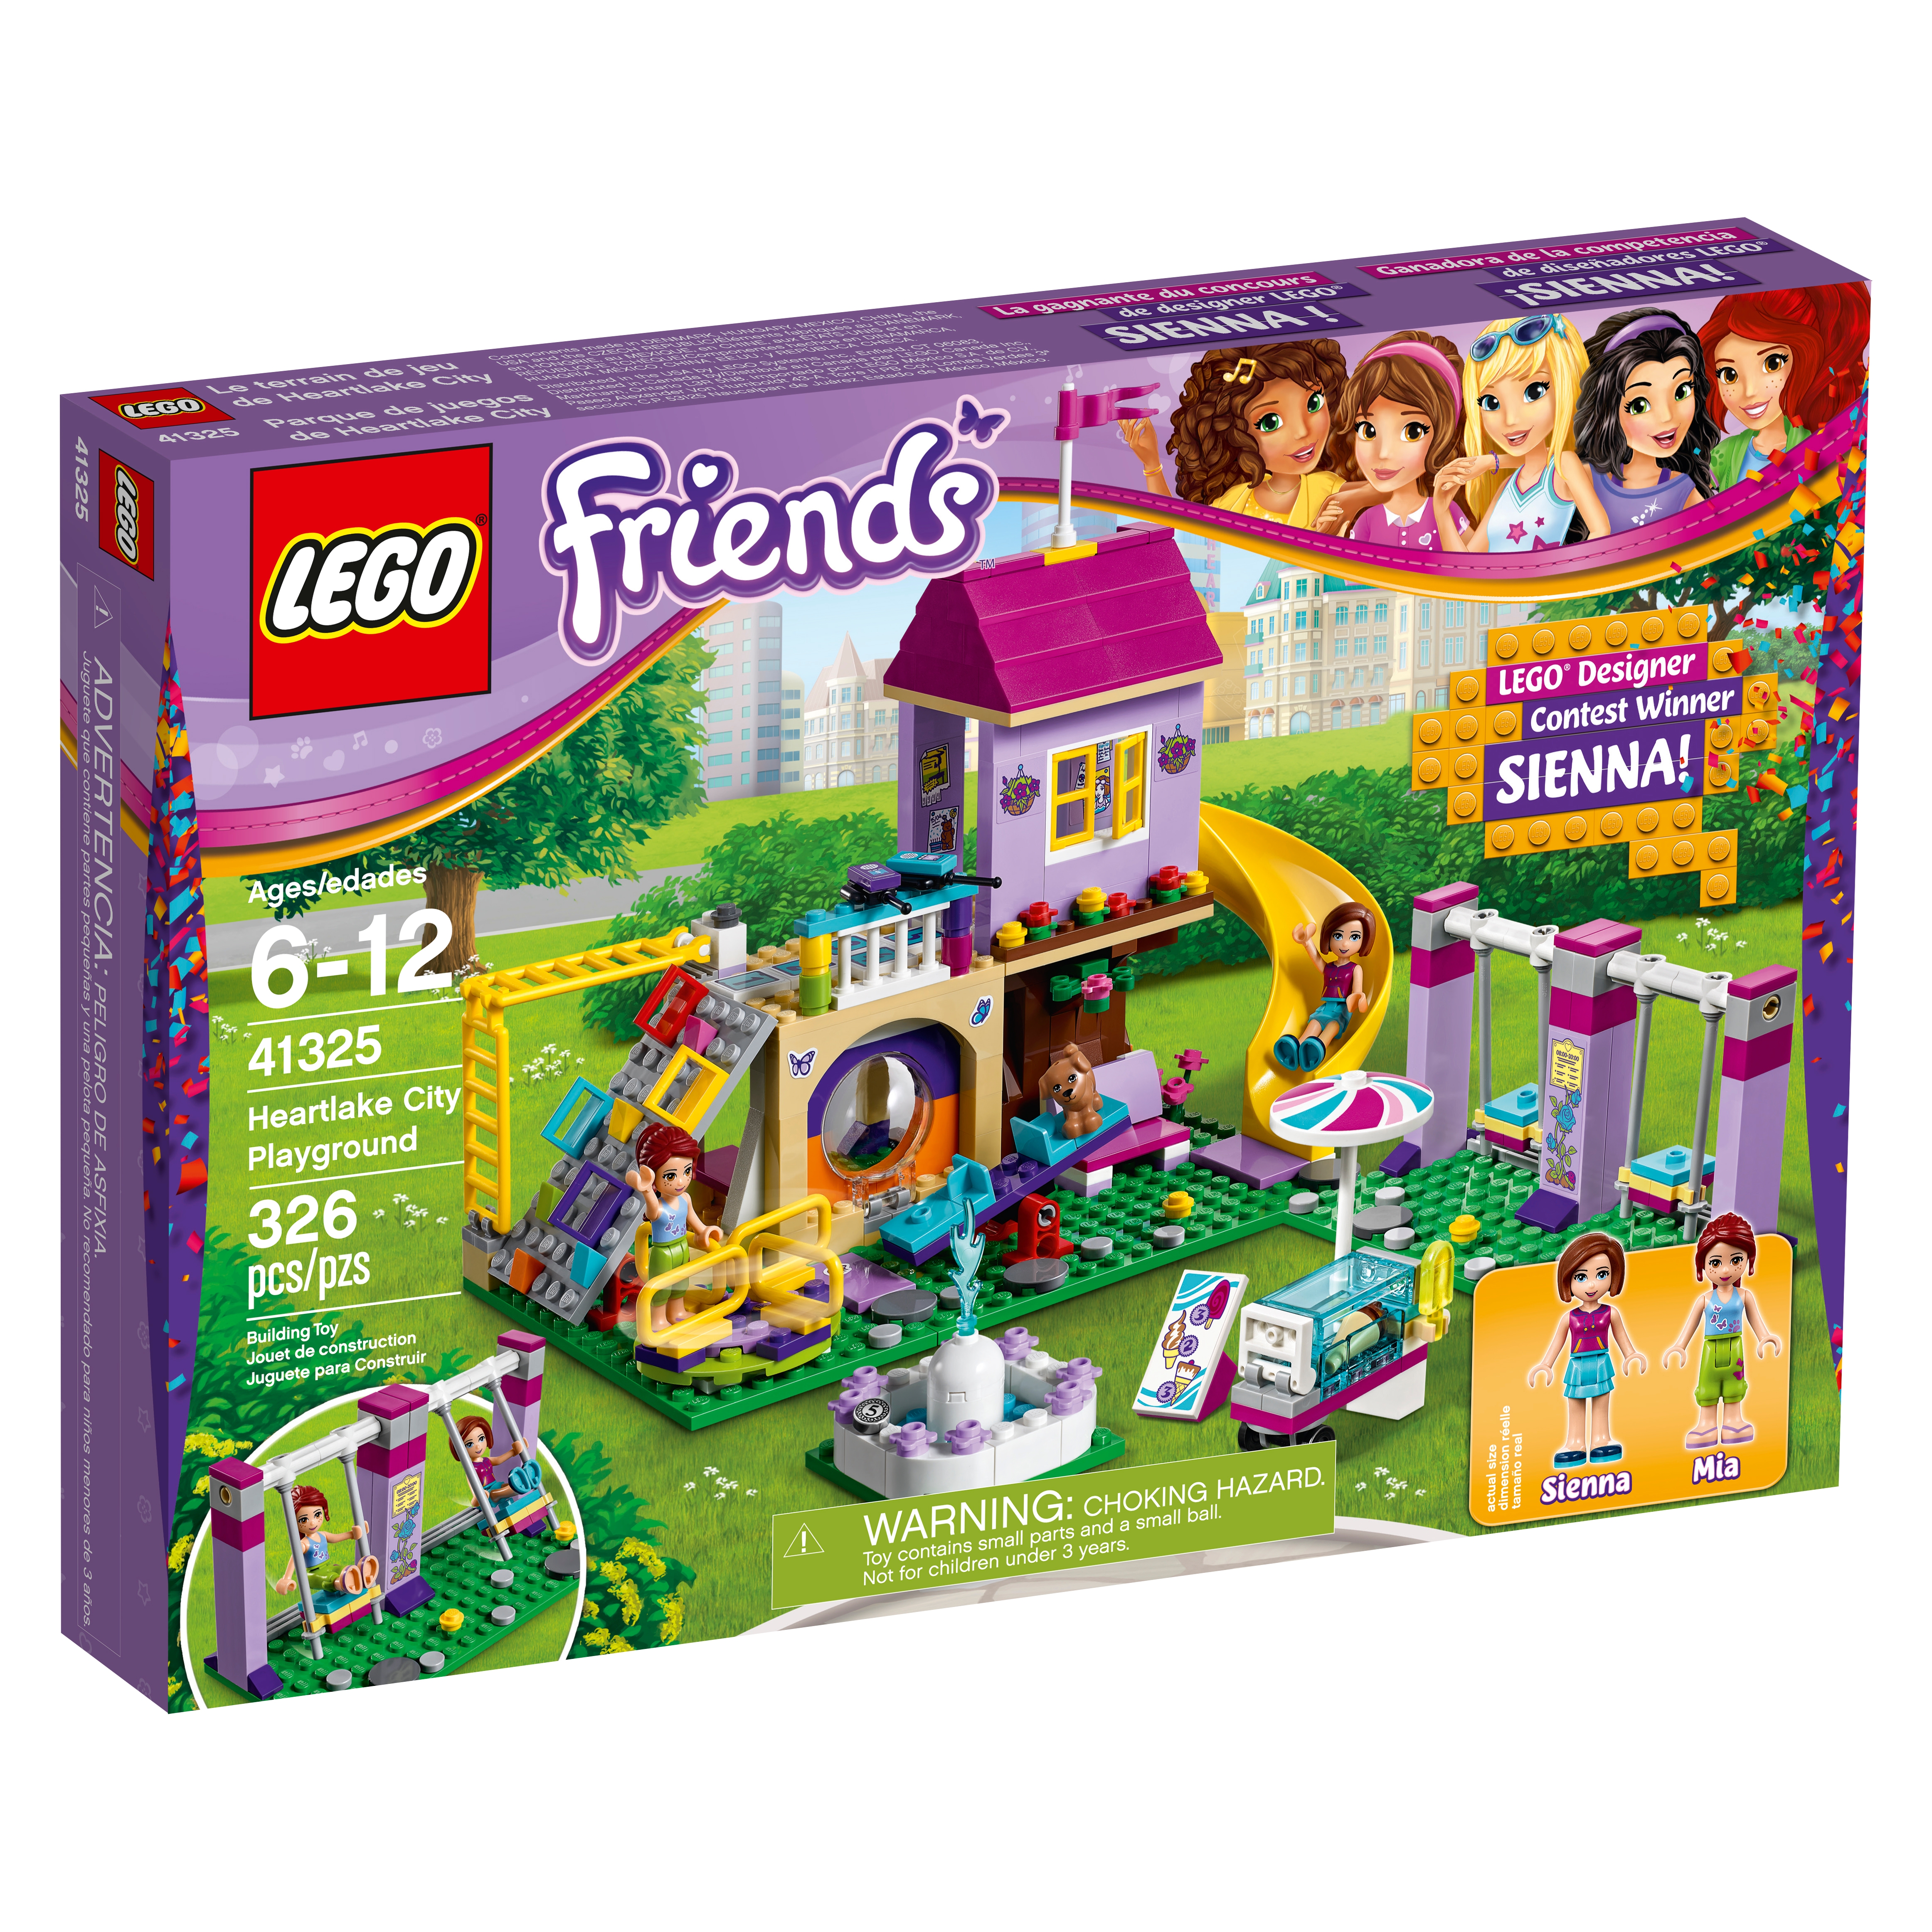 LEGO Friends contest winner - About Us - LEGO.com